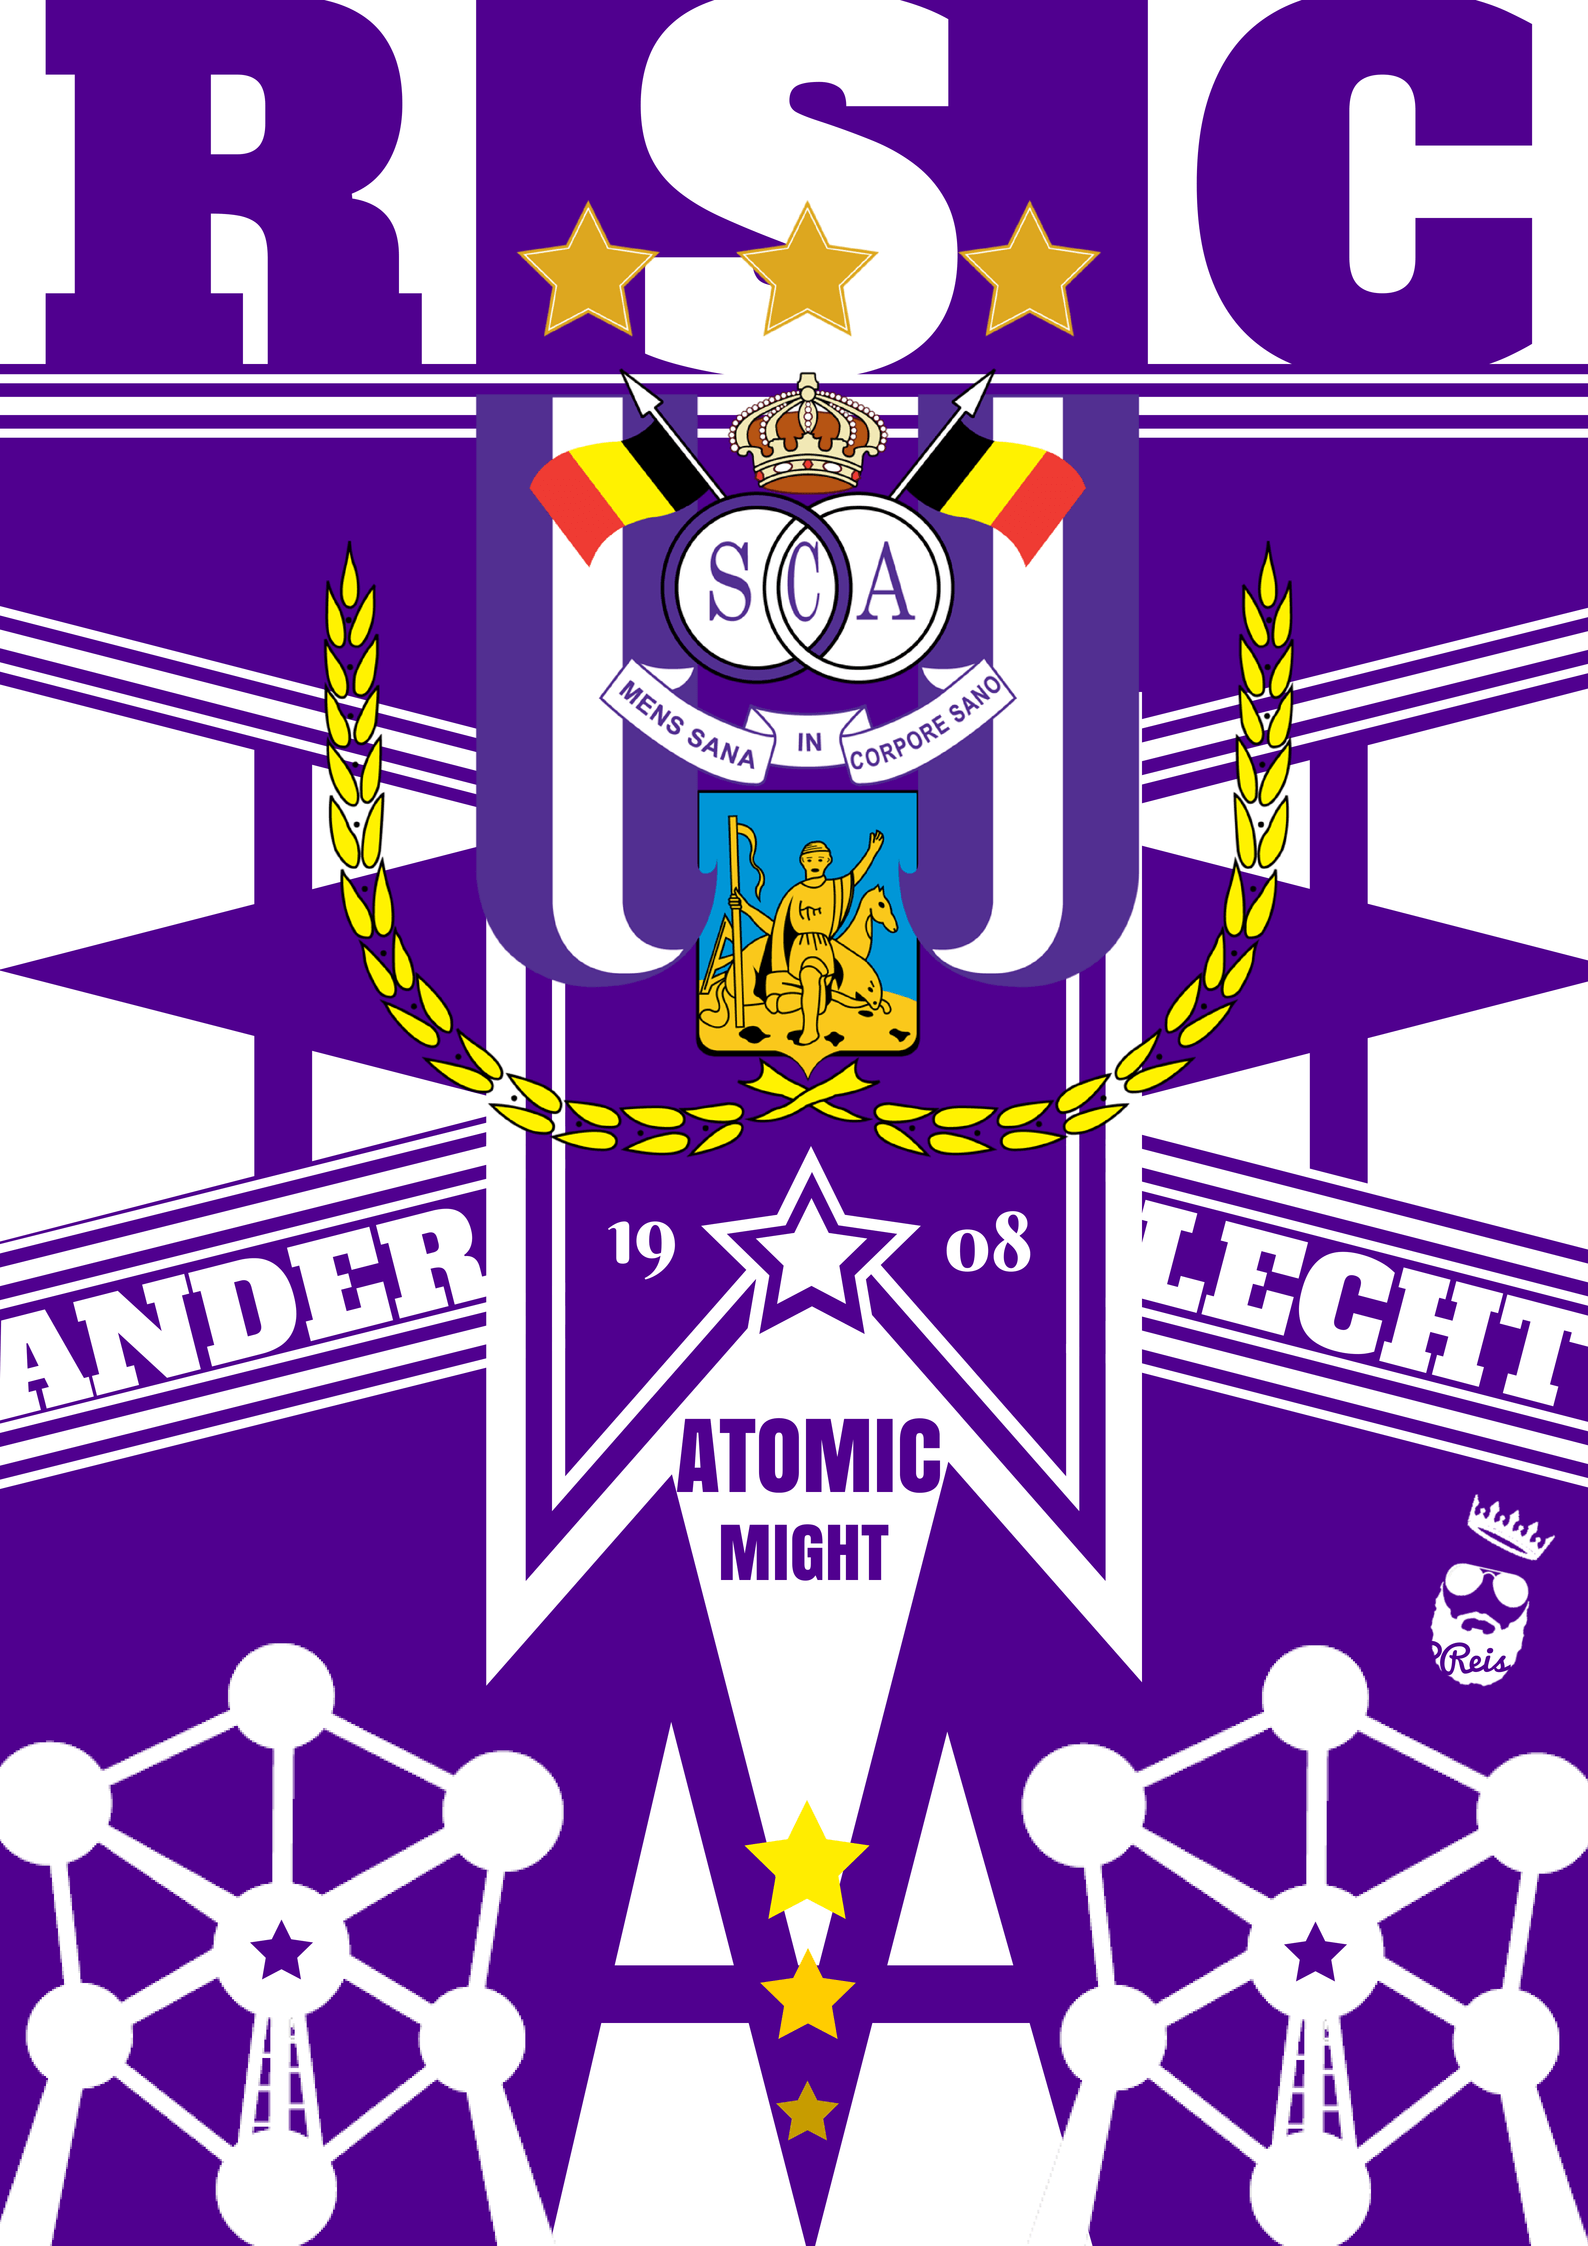 Anderlecht Might. sport. Sports and Logos